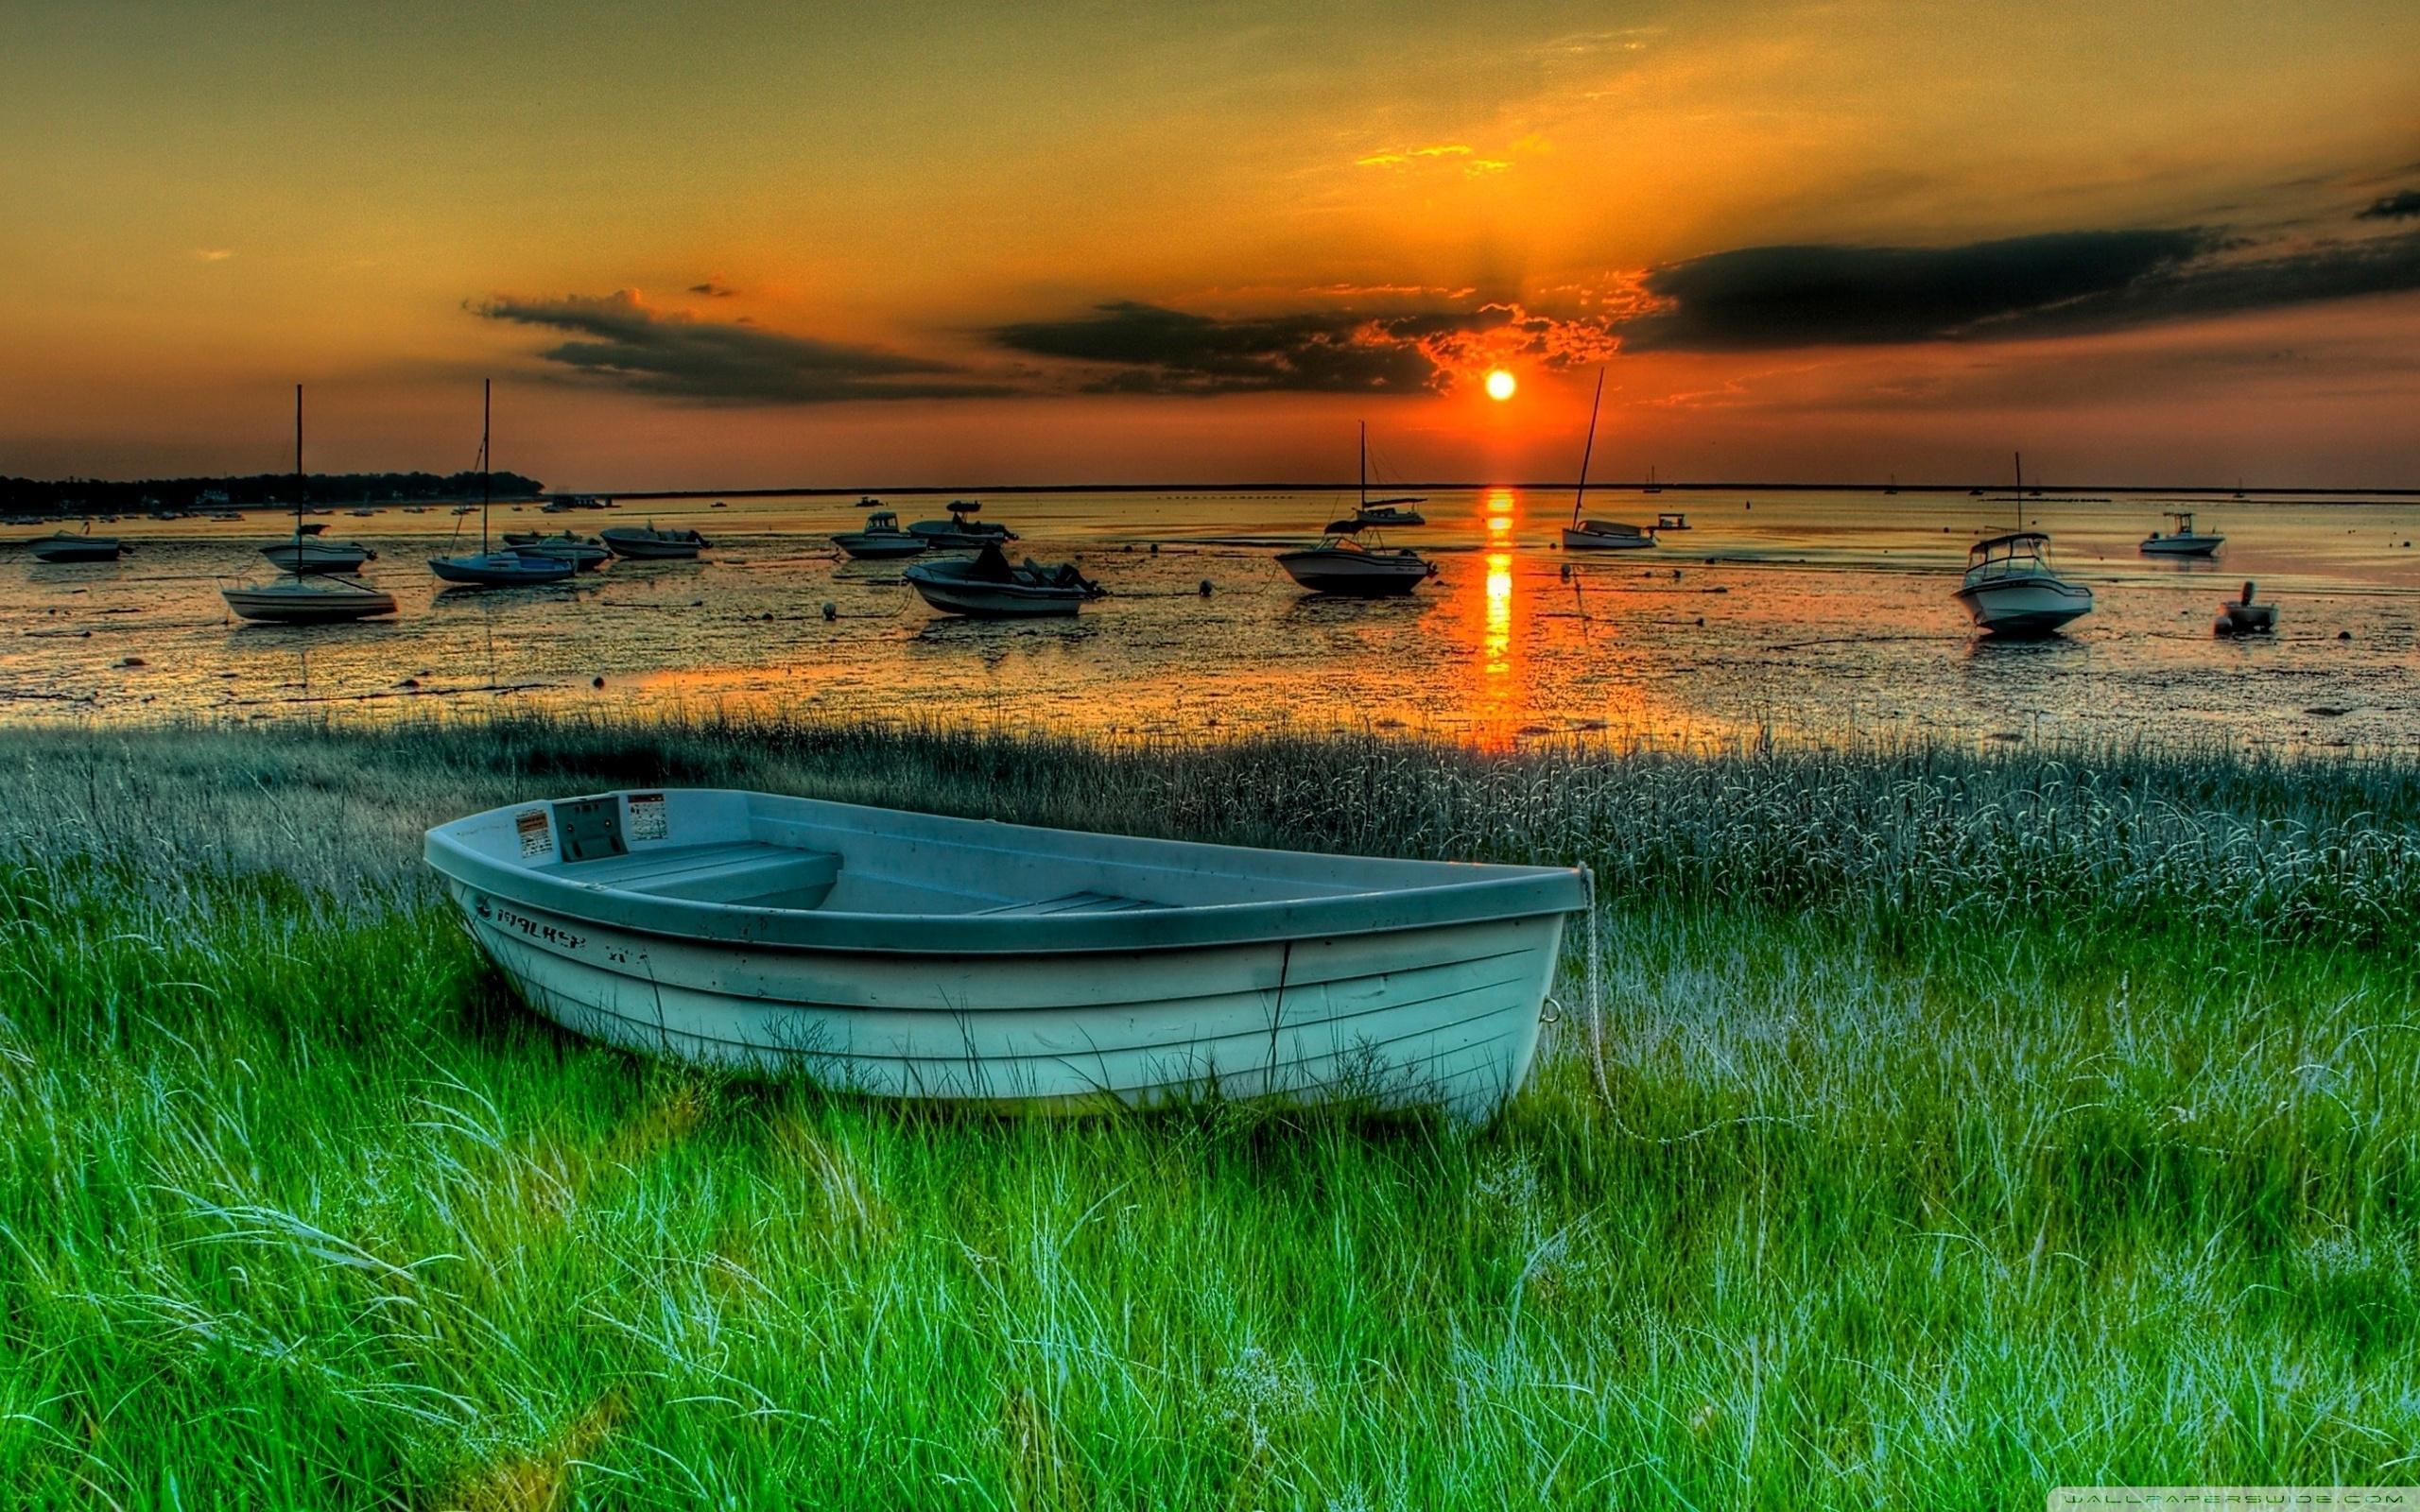 Boat At Sunset Wallpapers - Wallpaper Cave